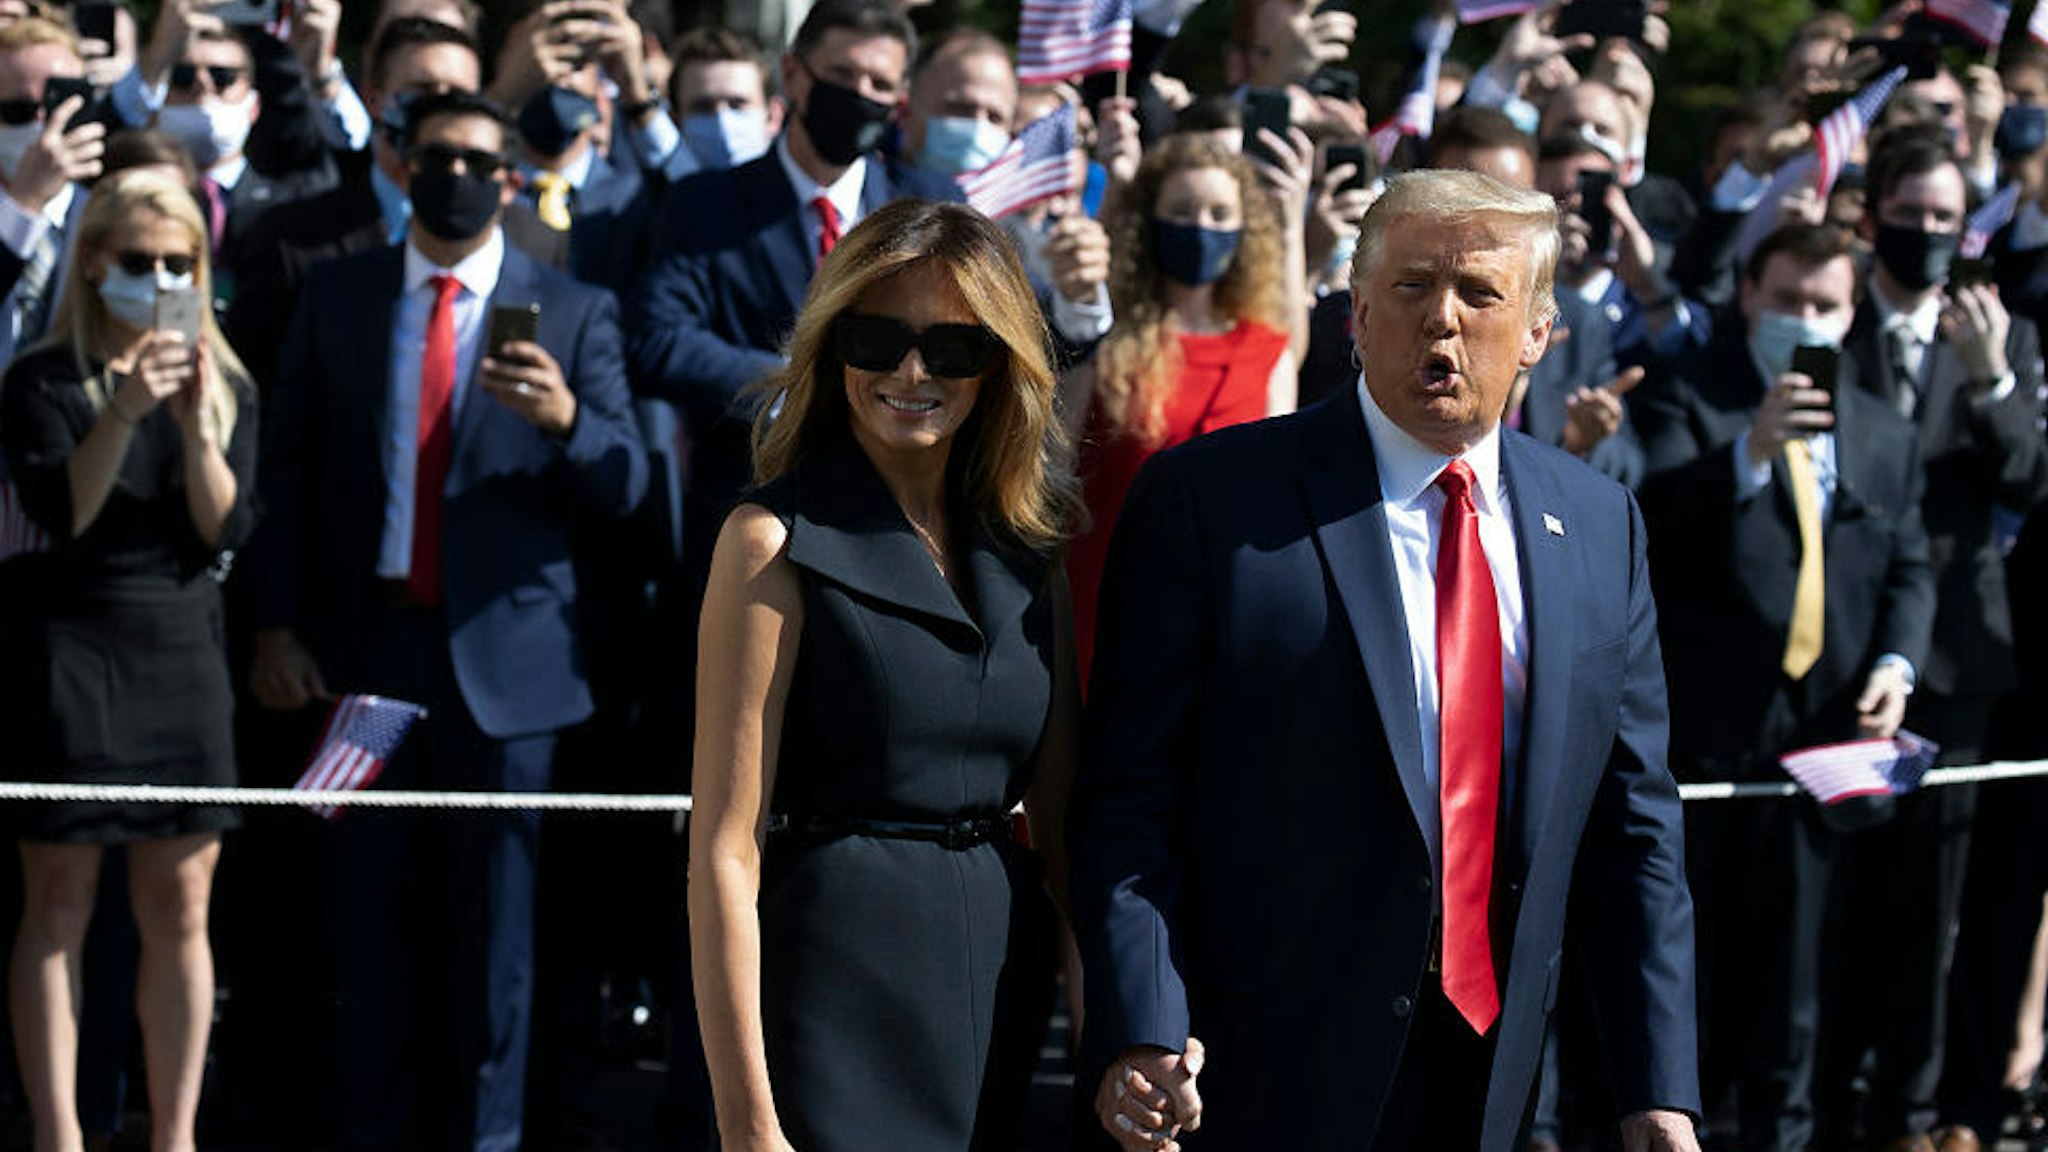 First Lady Melania Trump and President Donald Trump walk to the South Lawn to depart the White House on October 22, 2020 in Washington, DC. President Trump travels to Nashville, Tennessee for the final debate with Democratic presidential nominee Joe Biden. The Commission on Presidential Debates changed the format this time, muting of microphones to start each of Thursday's debate segments. (Photo by Tasos Katopodis/Getty Images)